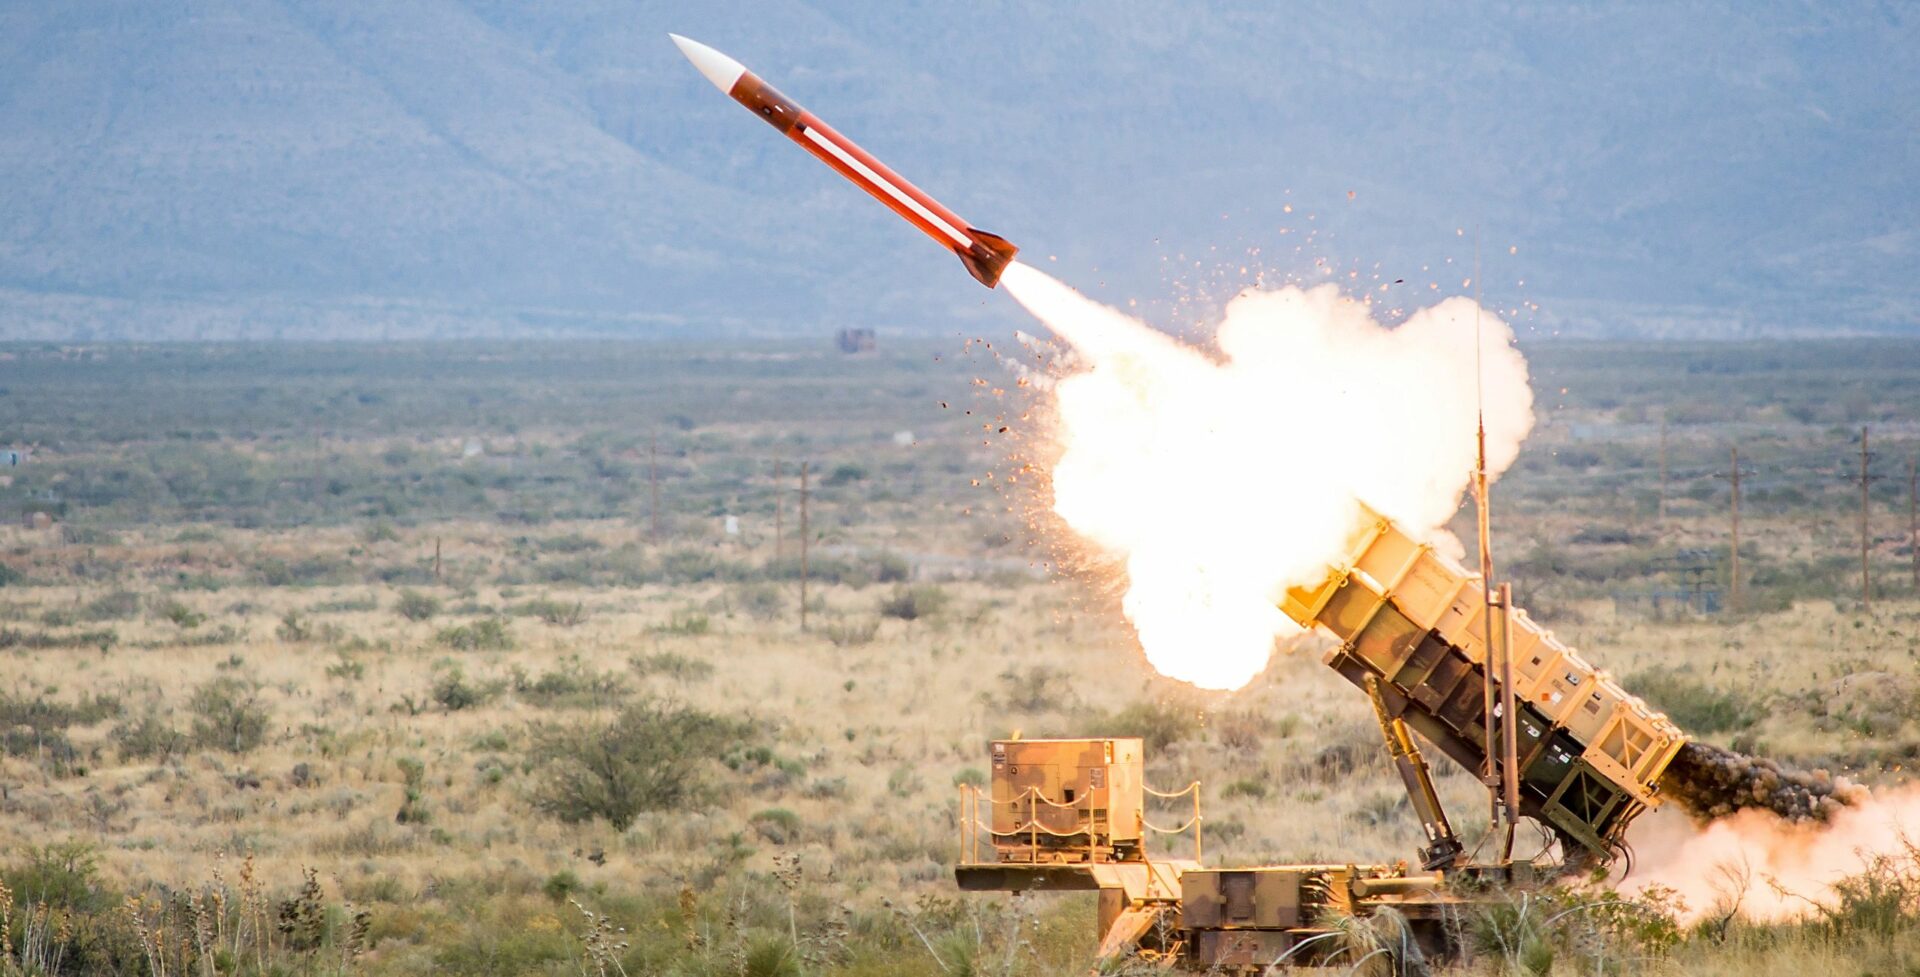 A rocket is being fired from an army vehicle.